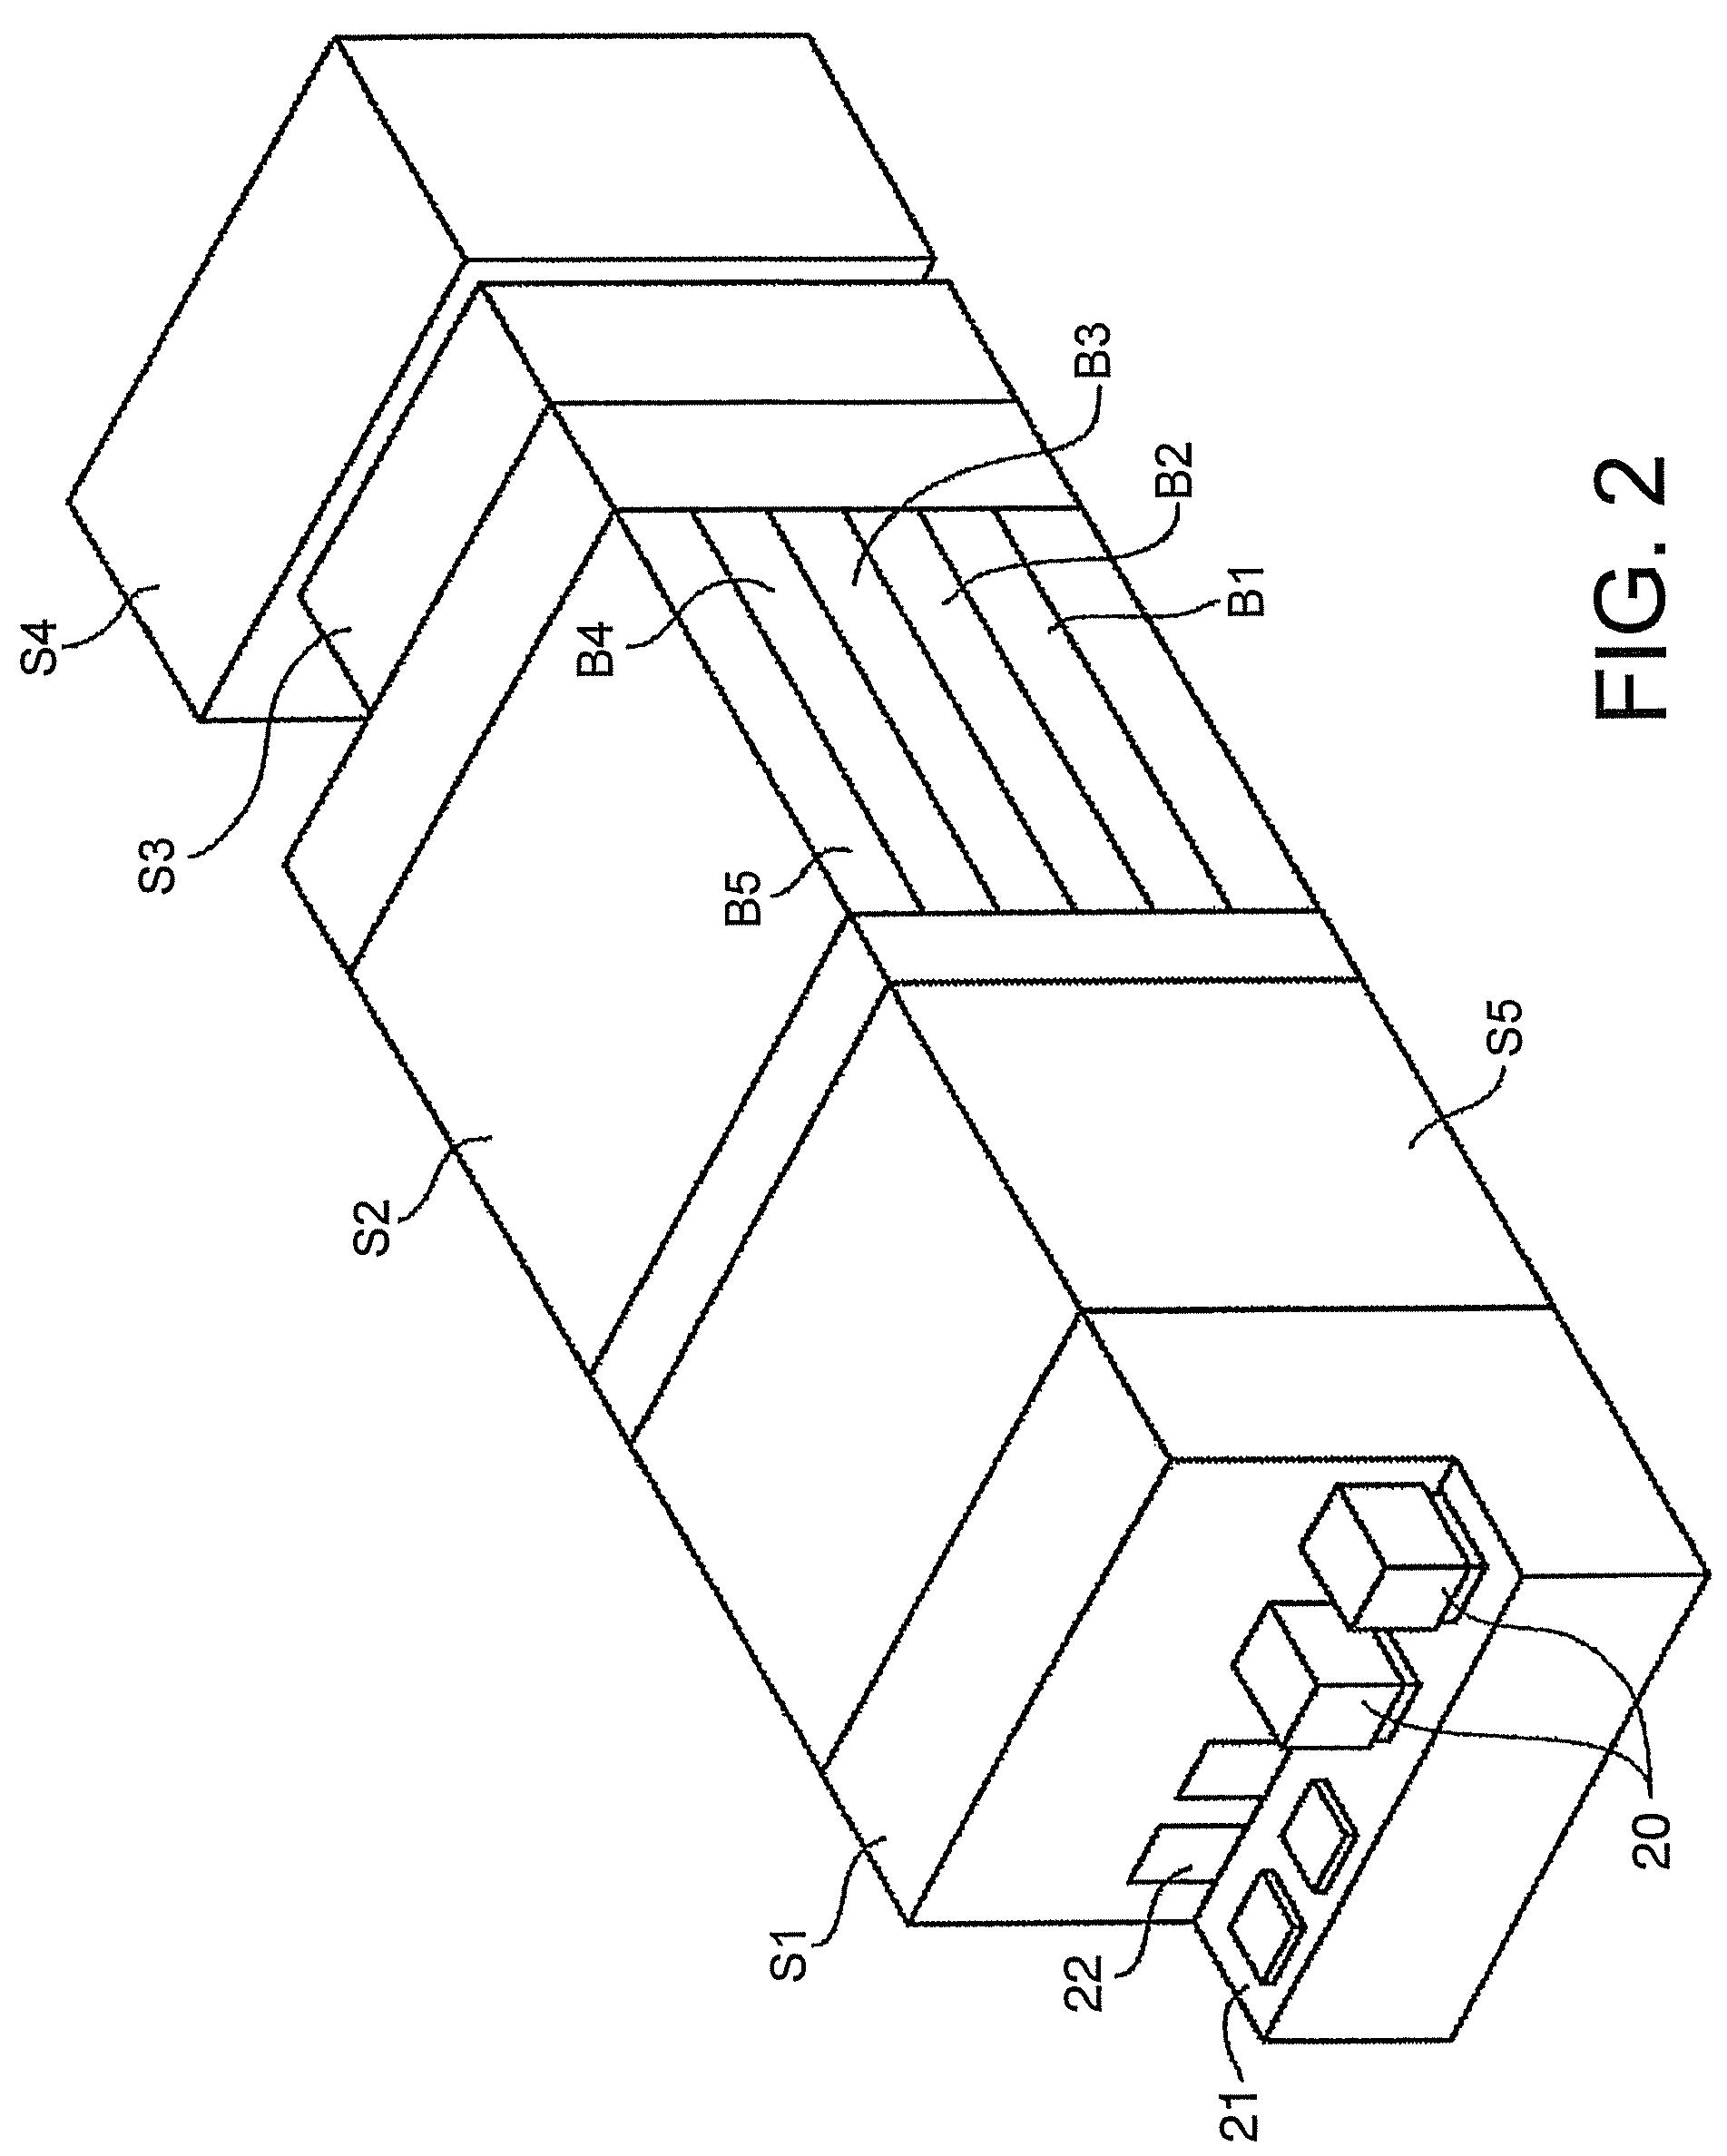 Coating and developing system control method of controlling coating and developing system